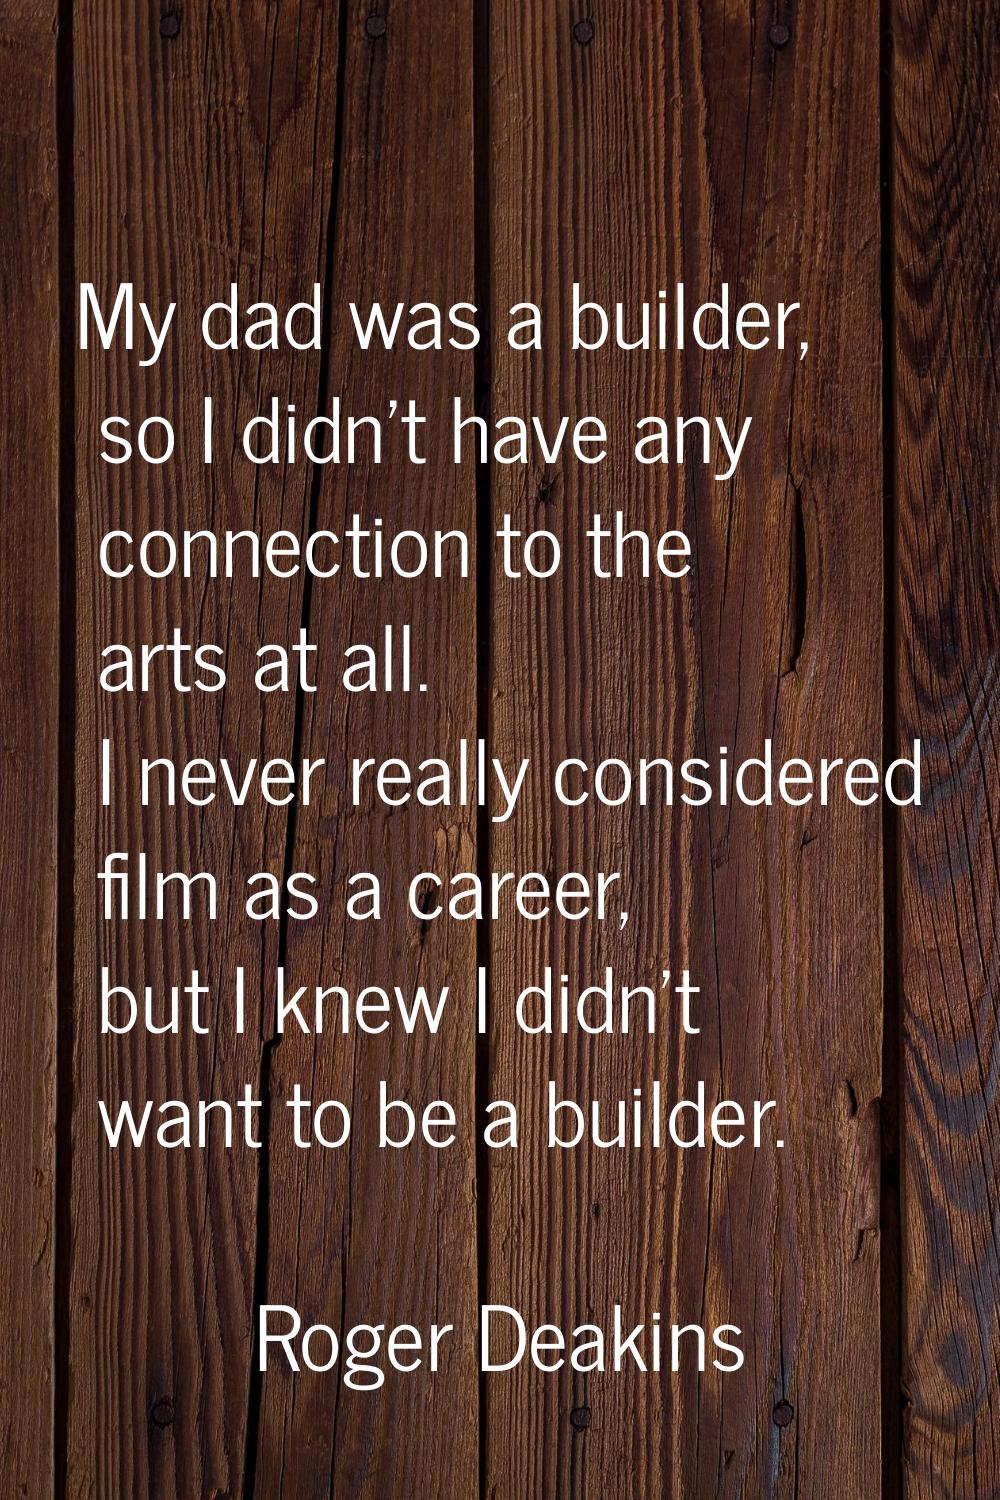 My dad was a builder, so I didn't have any connection to the arts at all. I never really considered